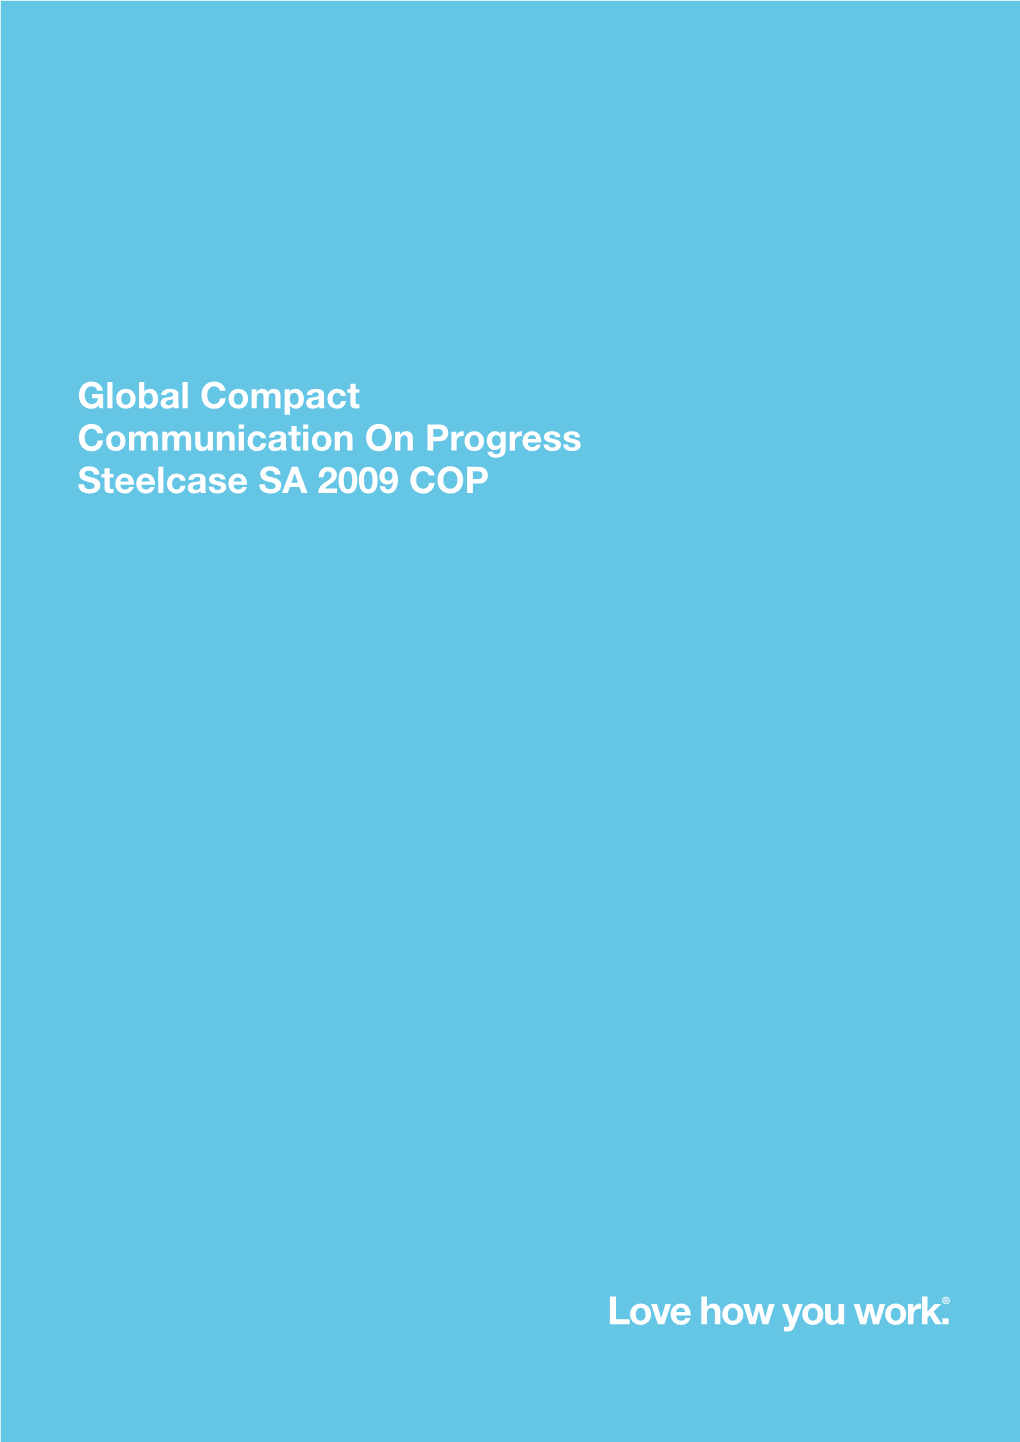 Global Compact Communication on Progress Steelcase SA 2009 COP 2 2009 Corporate Responsability Report